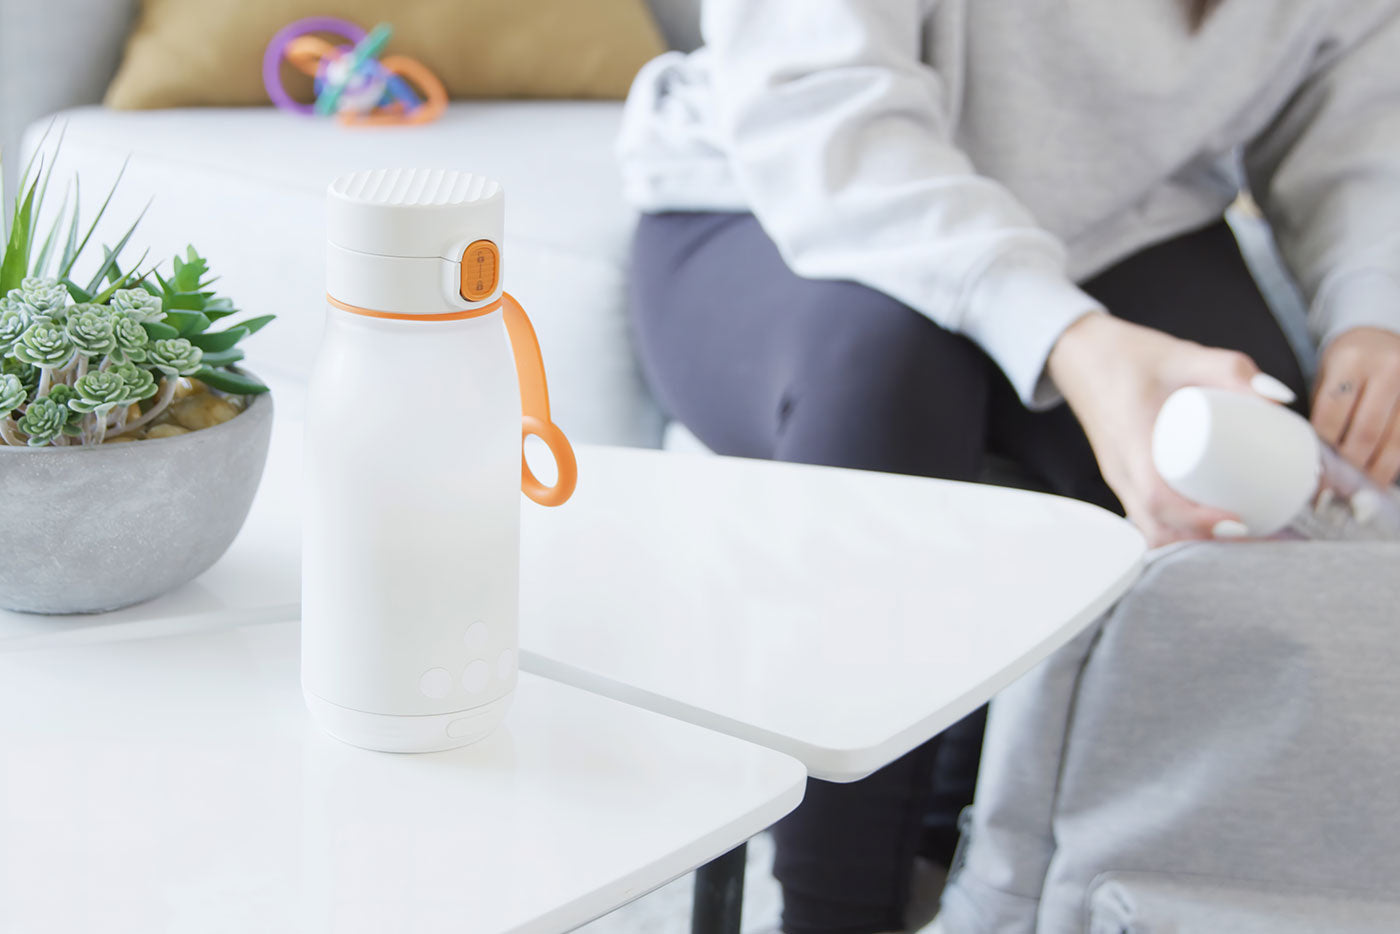 Quark Announces The Launch of Its First to Market Innovation - BuubiBottle Smart Portable Milk Warmer